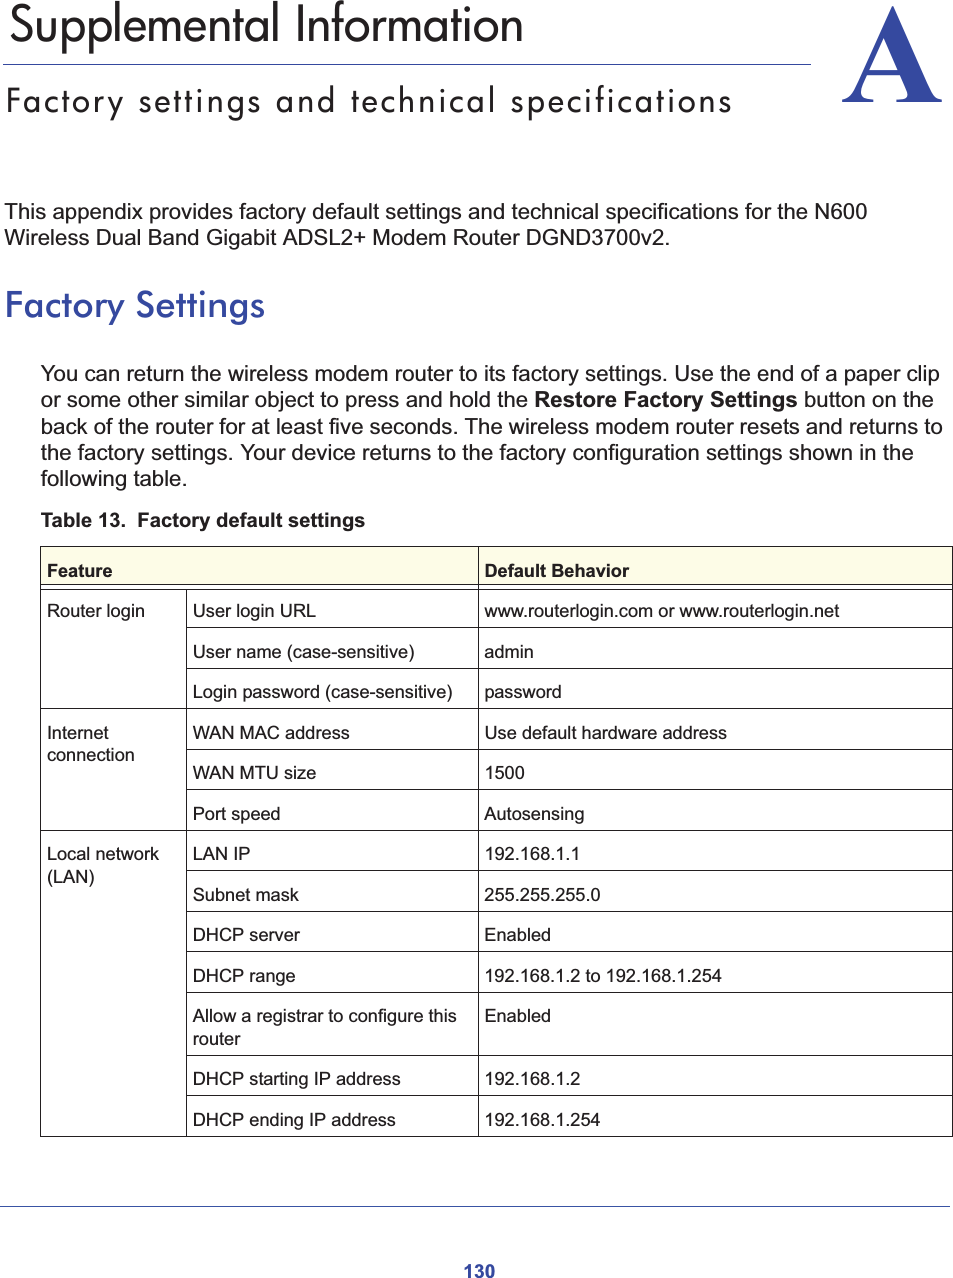 130AA. Supplemental InformationFactory settings and technical specificationsThis appendix provides factory default settings and technical specifications for the N600 Wireless Dual Band Gigabit ADSL2+ Modem Router DGND3700v2.Factory SettingsYou can return the wireless modem router to its factory settings. Use the end of a paper clip or some other similar object to press and hold the Restore Factory Settings button on the back of the router for at least five seconds. The wireless modem router resets and returns to the factory settings. Your device returns to the factory configuration settings shown in the following table.Table 13.  Factory default settings Feature Default BehaviorRouter login User login URL www.routerlogin.com or www.routerlogin.netUser name (case-sensitive) admin Login password (case-sensitive) passwordInternet connectionWAN MAC address Use default hardware addressWAN MTU size 1500Port speed AutosensingLocal network (LAN)LAN IP 192.168.1.1Subnet mask 255.255.255.0DHCP server EnabledDHCP range 192.168.1.2 to 192.168.1.254Allow a registrar to configure this routerEnabledDHCP starting IP address 192.168.1.2DHCP ending IP address 192.168.1.254